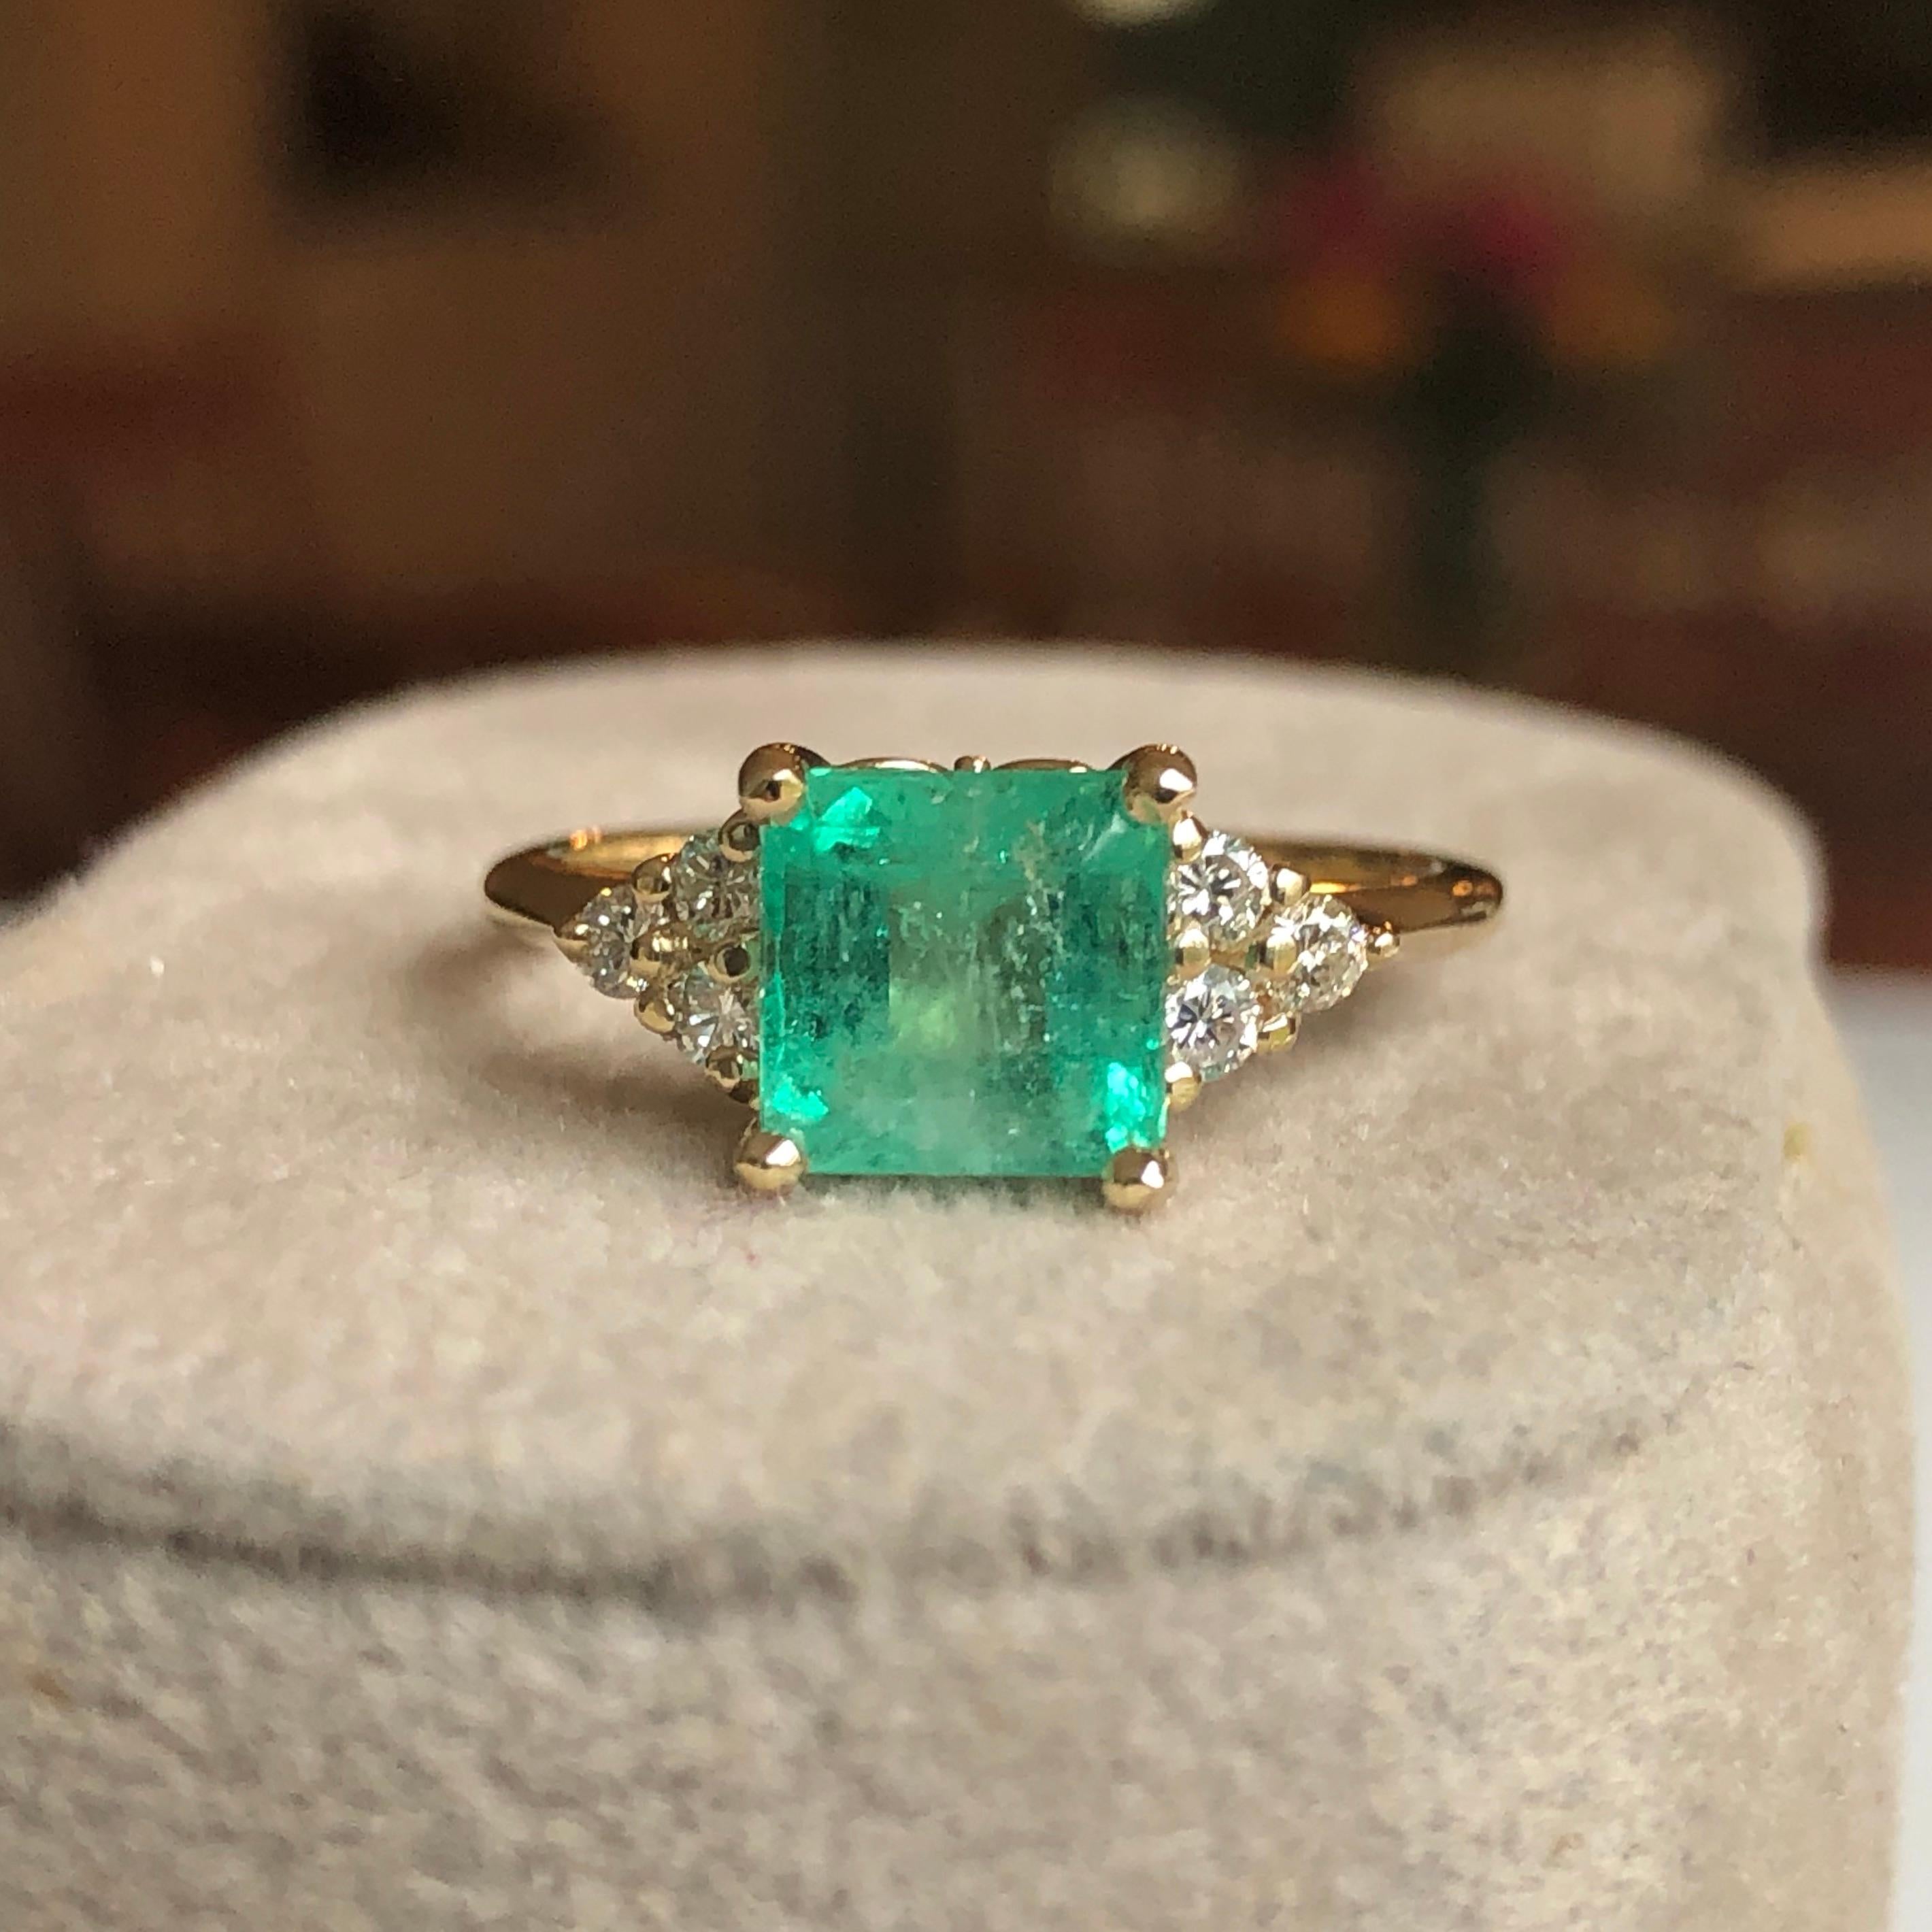 Women's Square Cut Emerald and Diamond Ring Gold